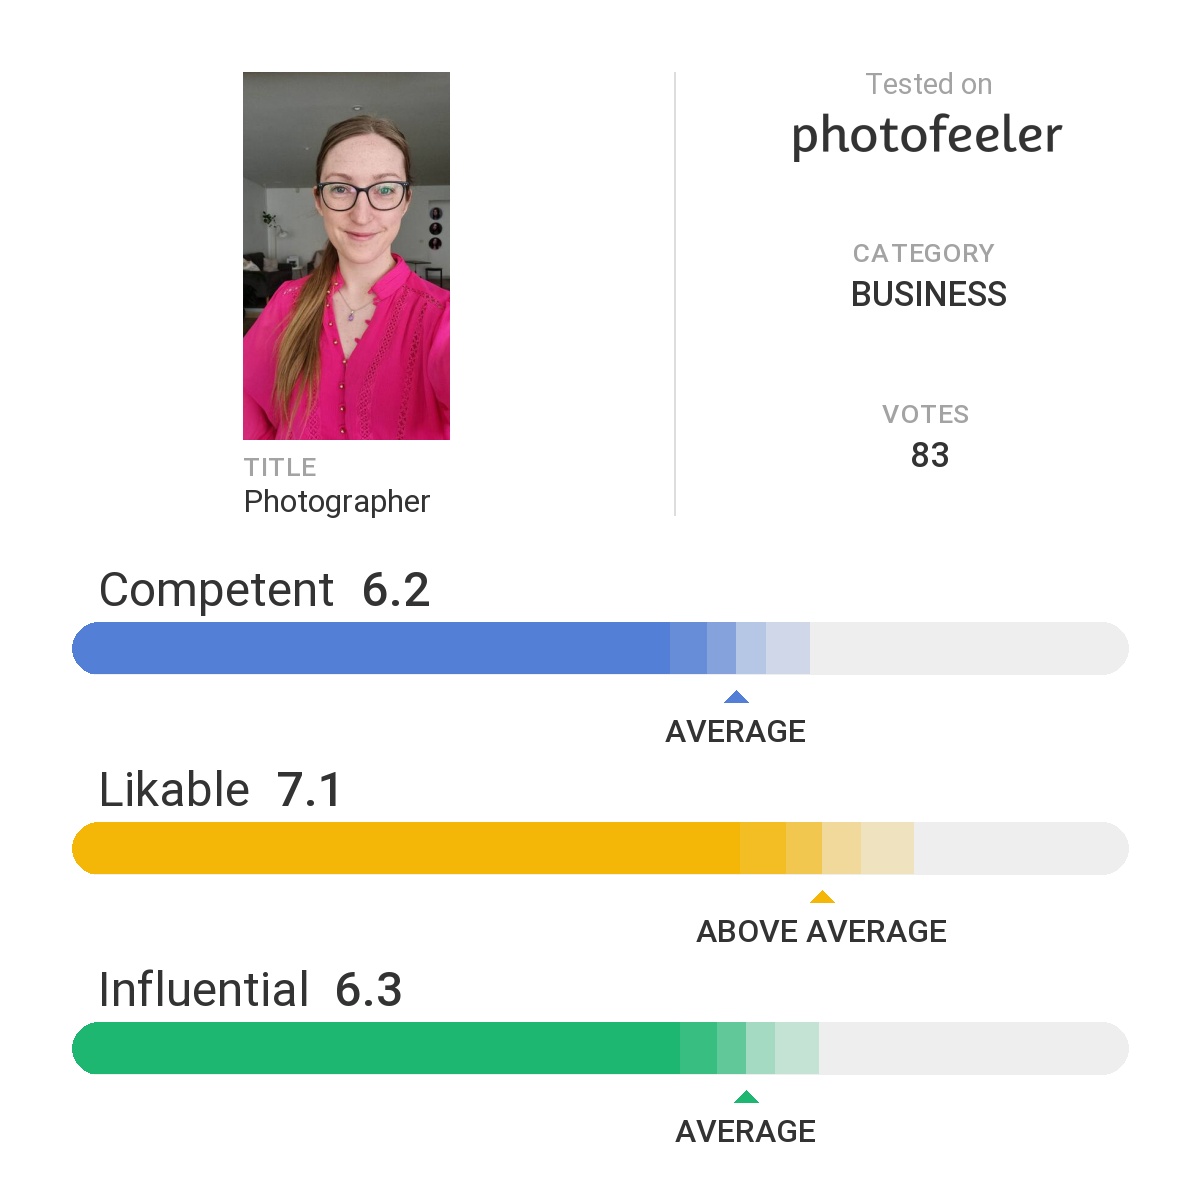 An image from Photofeeler showing the results from a headshot test, using a selfie. Competency at 6.2, likeability at 7.1 and influence at 6.3.